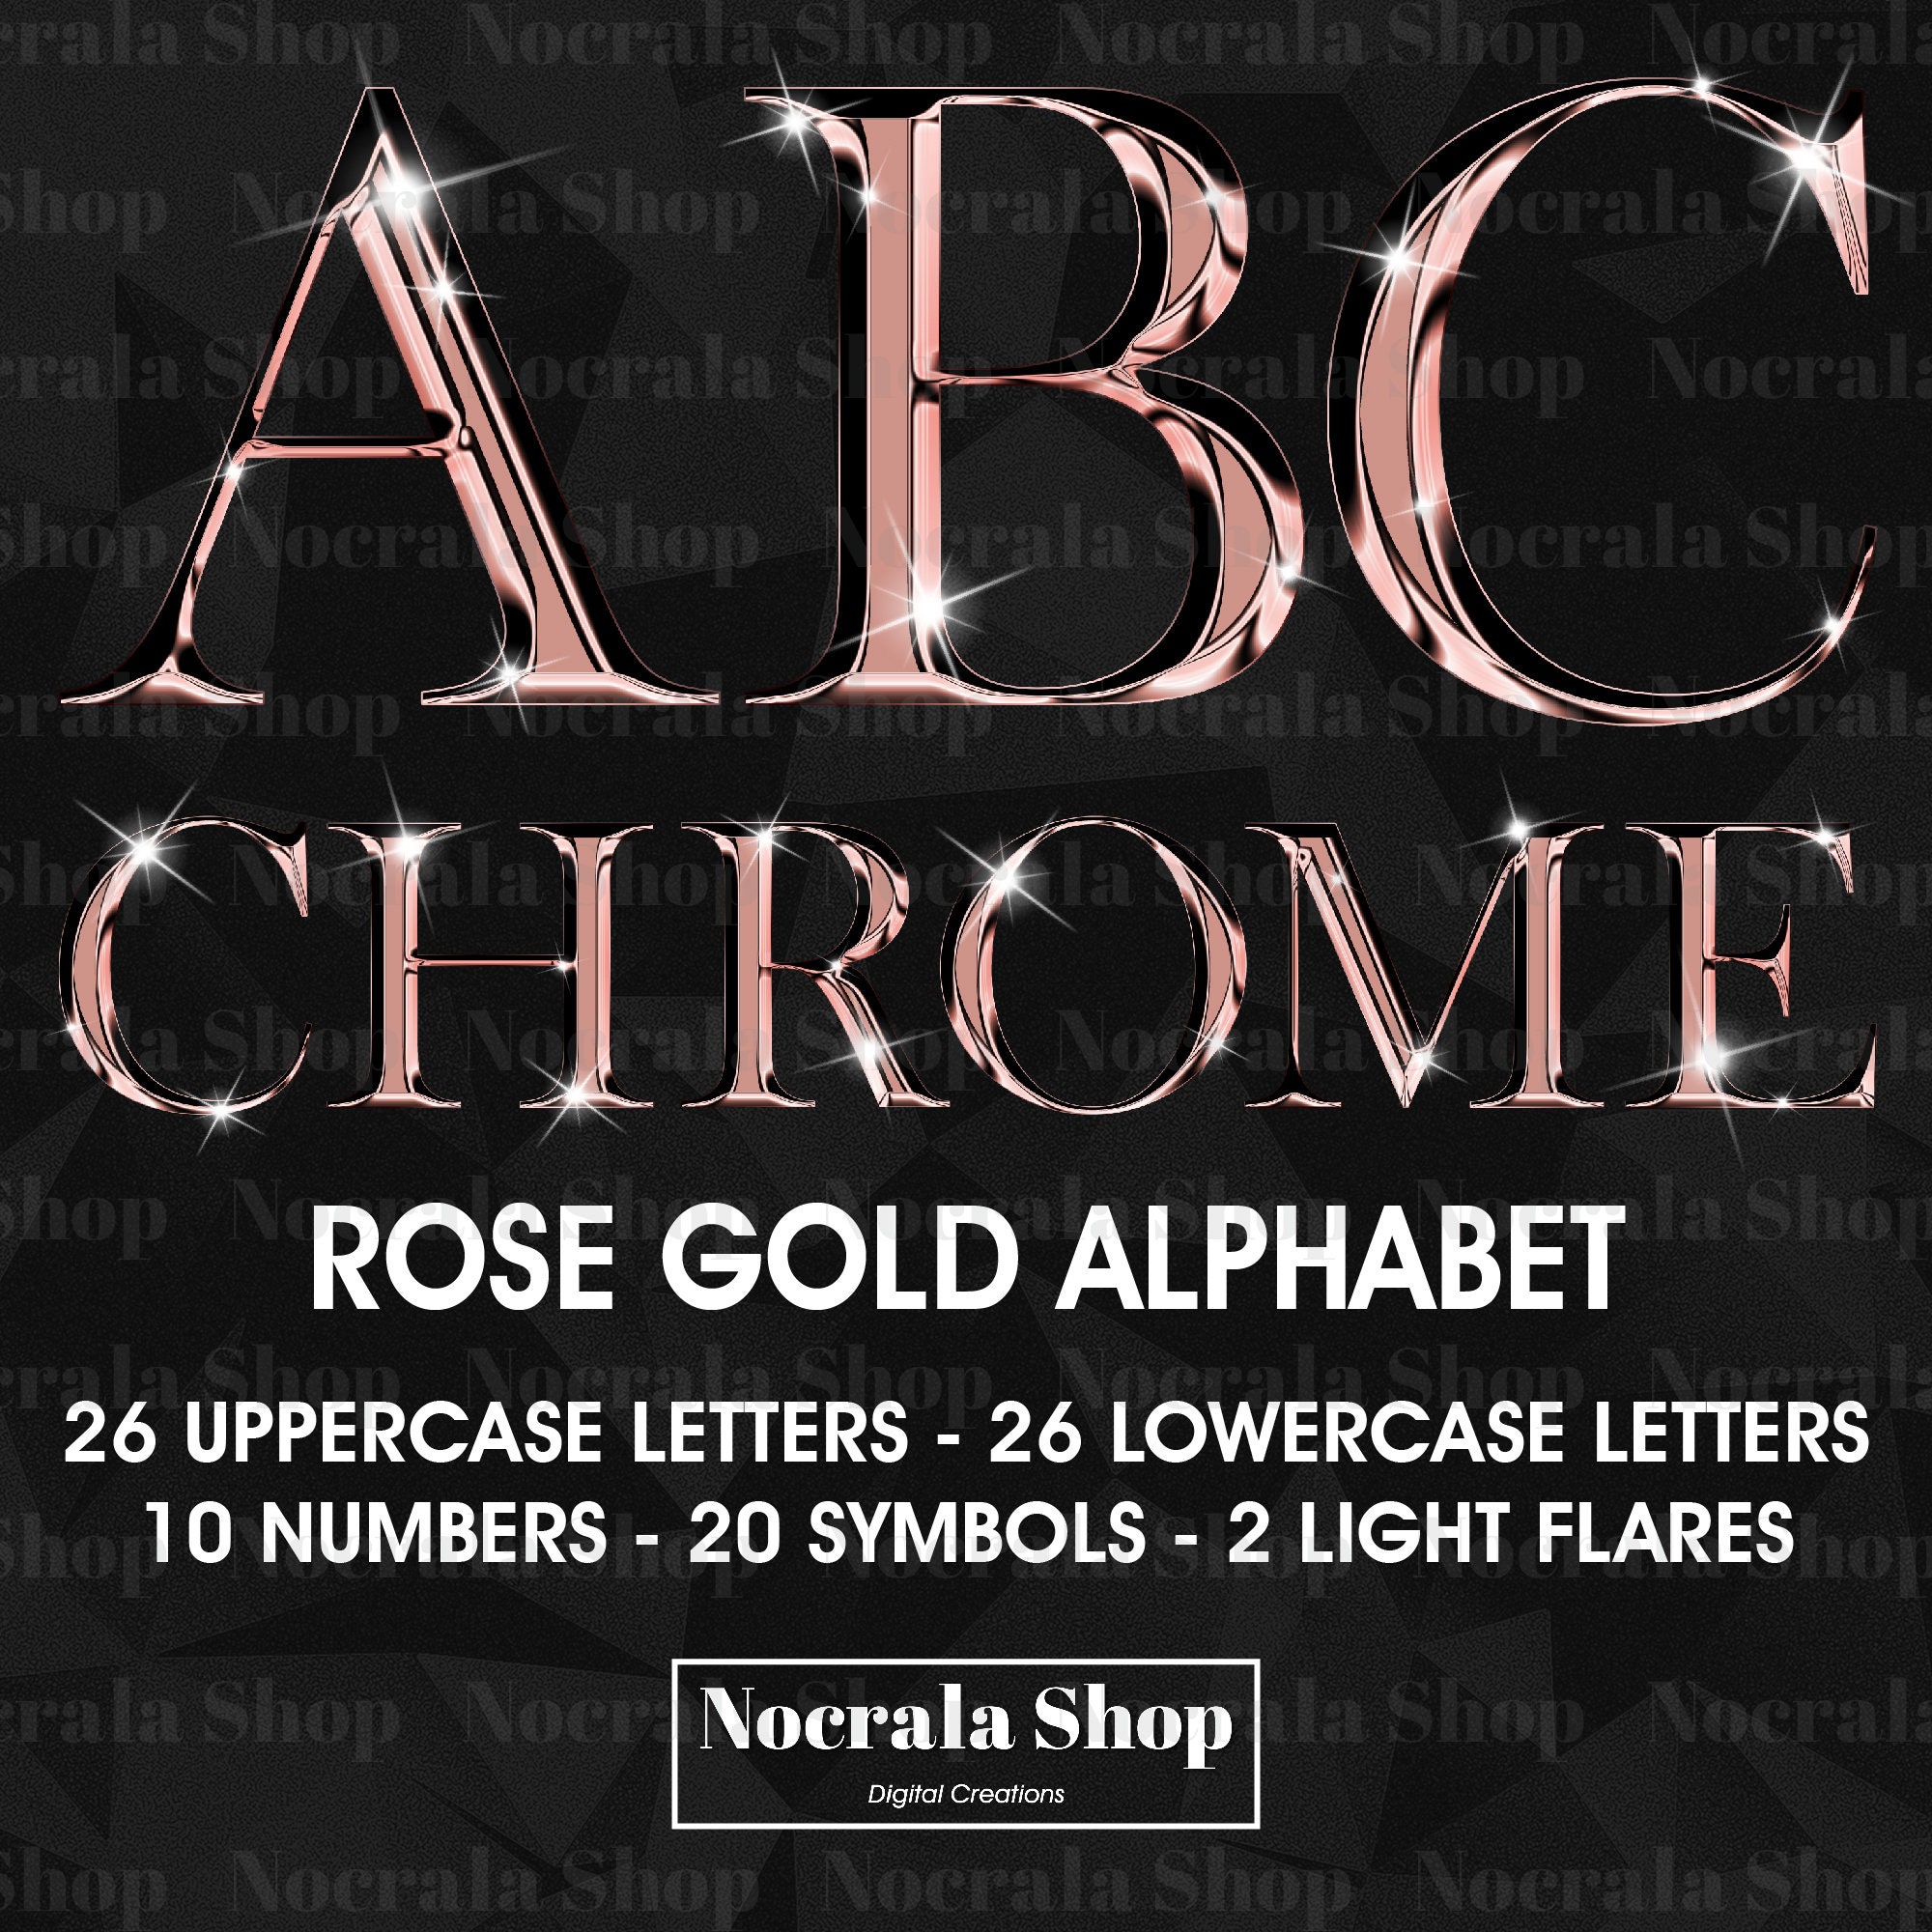 Custom made Outdoor rose gold color metal letters, rose gold stainless  steel logo signs, satin chrom finish gold color letter